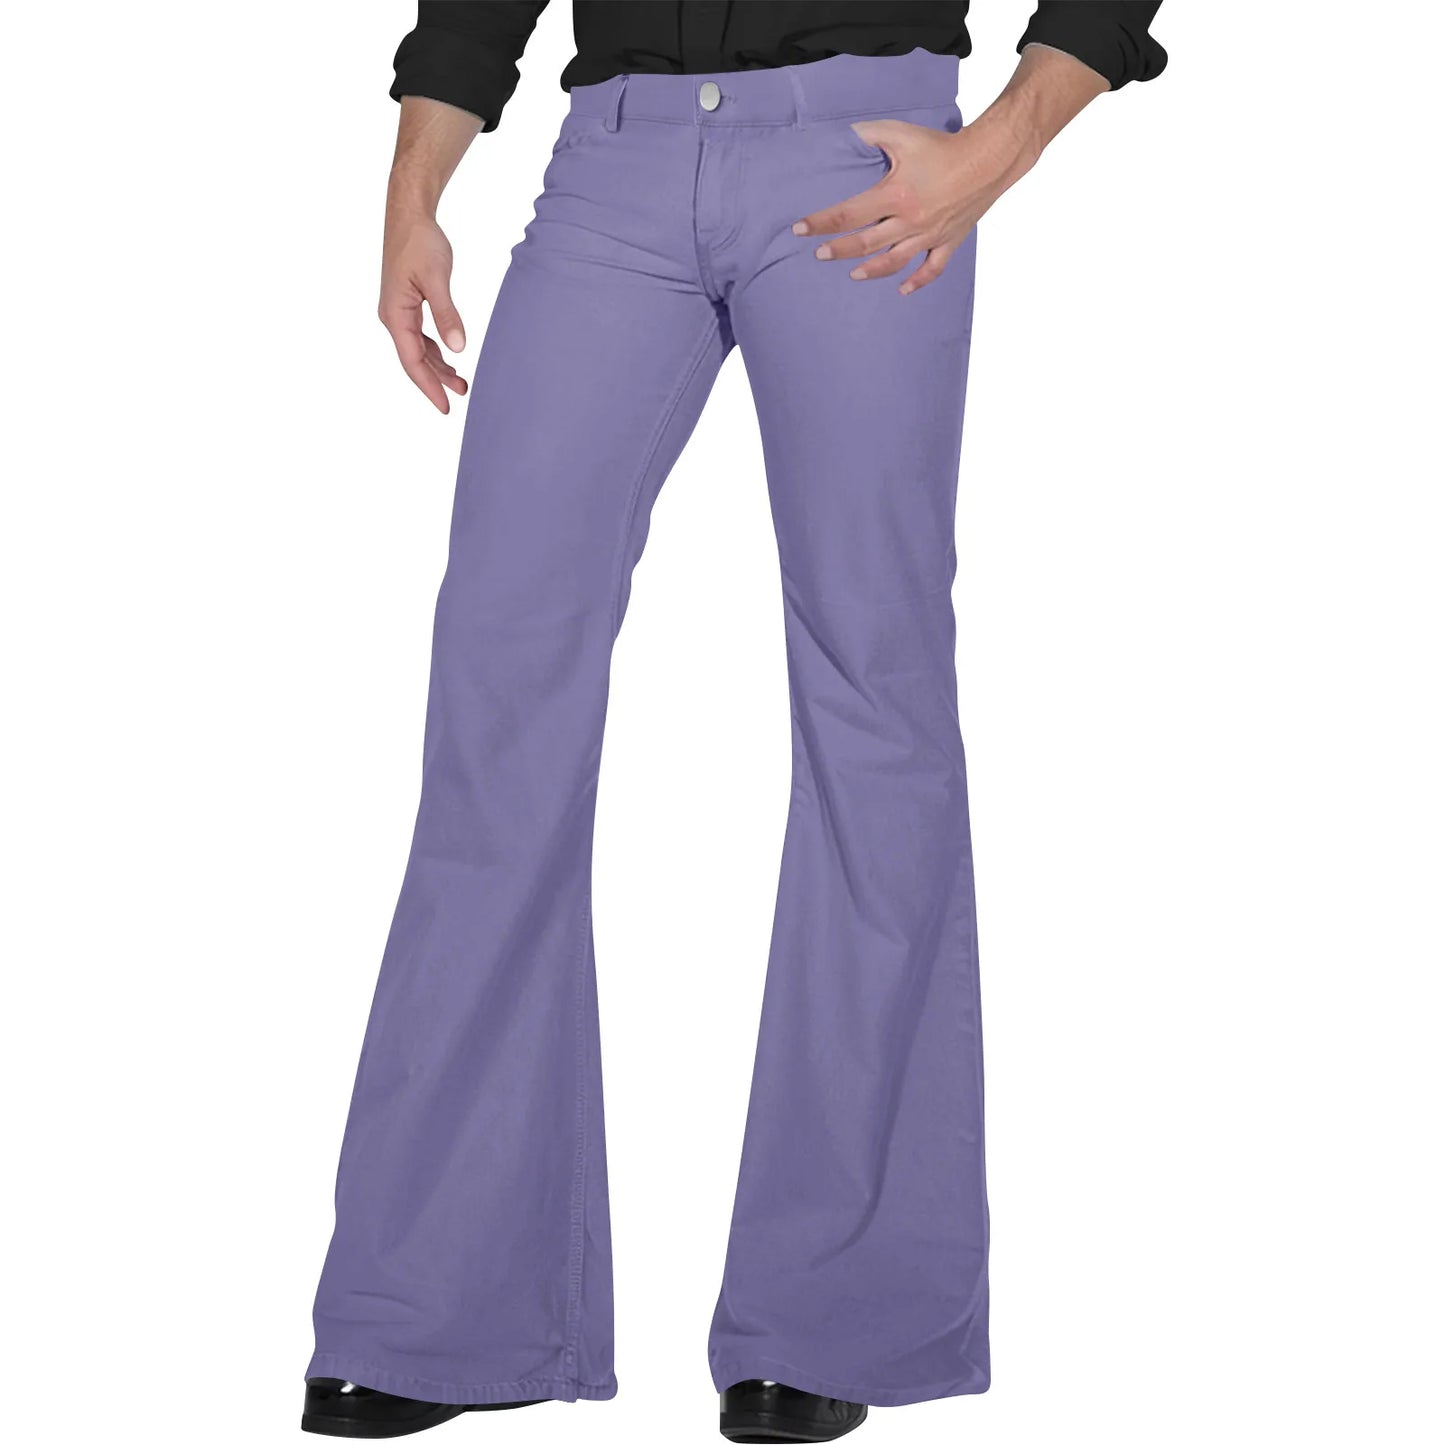 Men'S Retro Disco Flared Pants Loose Stretch Vintage Trousers